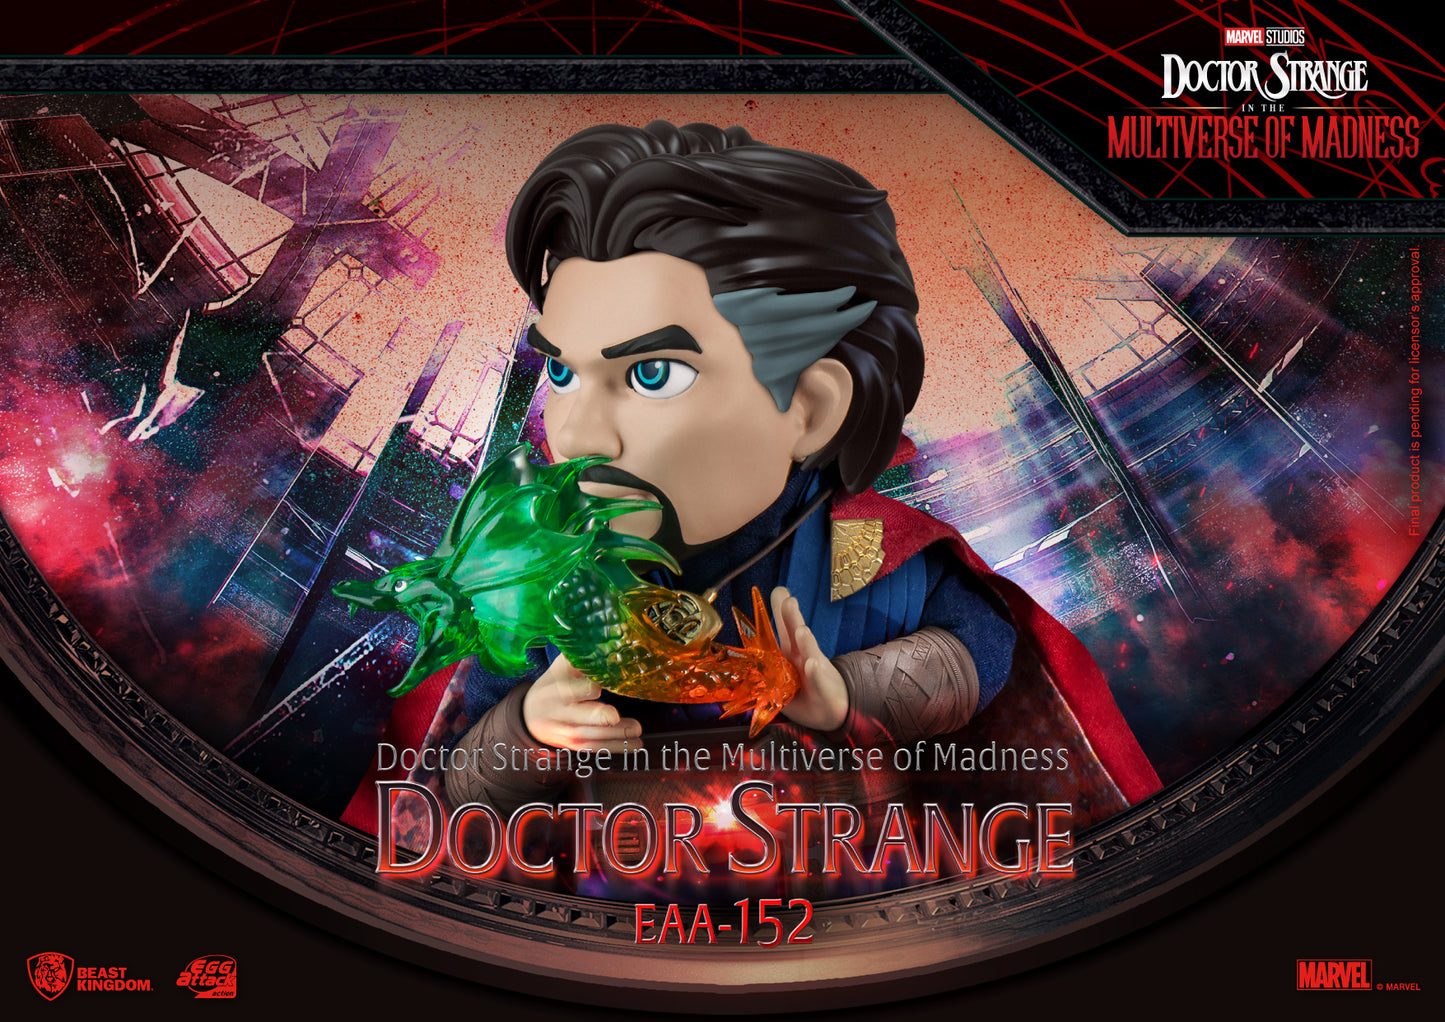 PREORDER EAA-152 Doctor Strange in the Mulverse of Madness Dr Strange